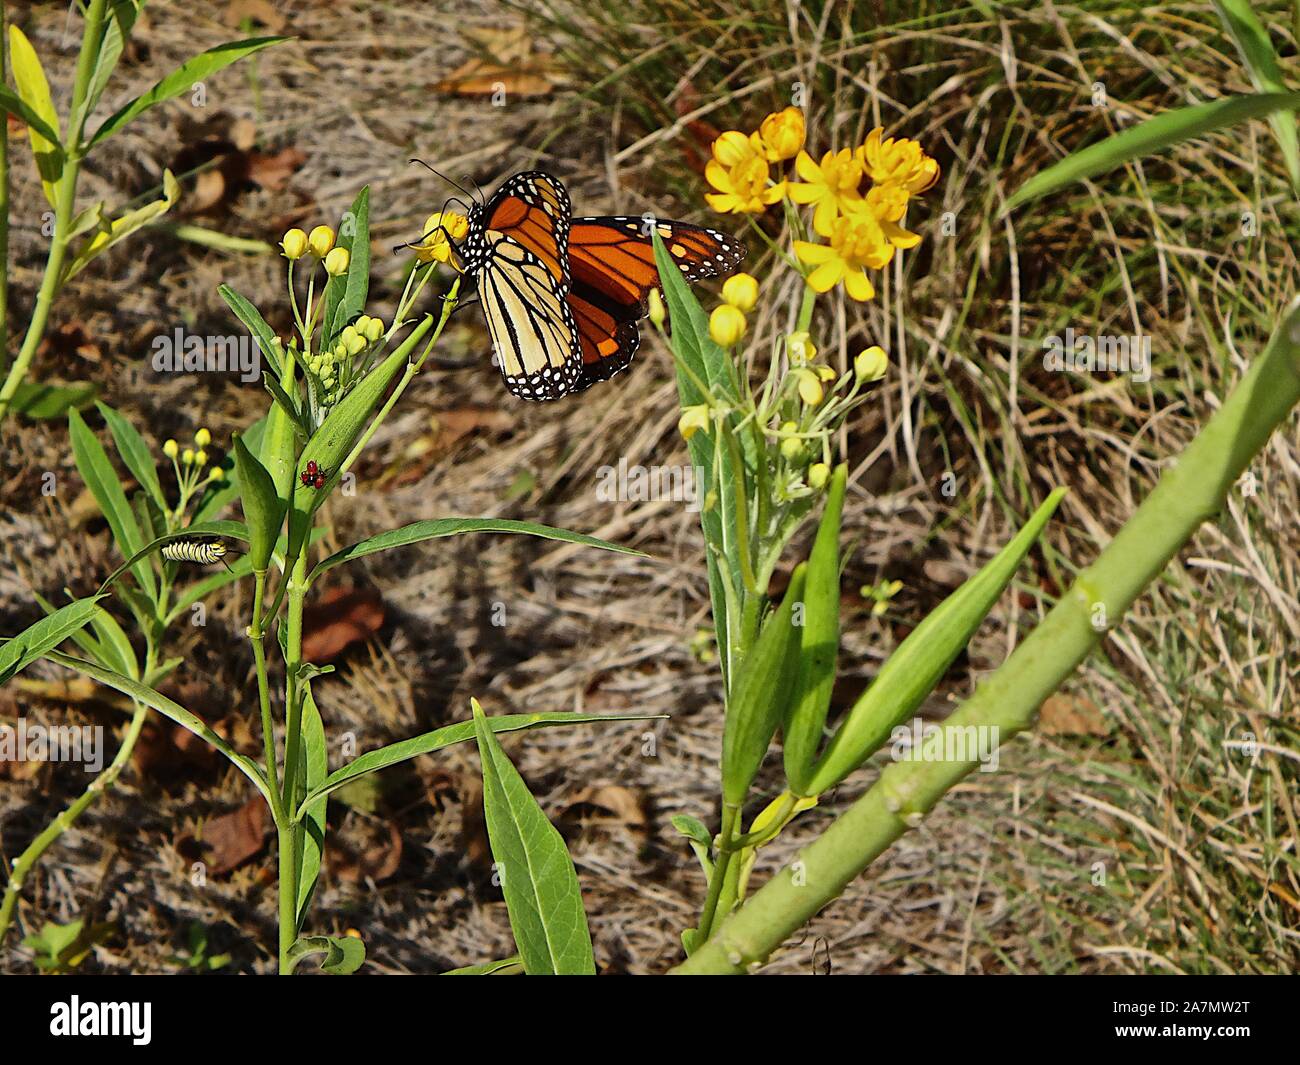 New Orleans, Louisiana - butterfly Stock Photo